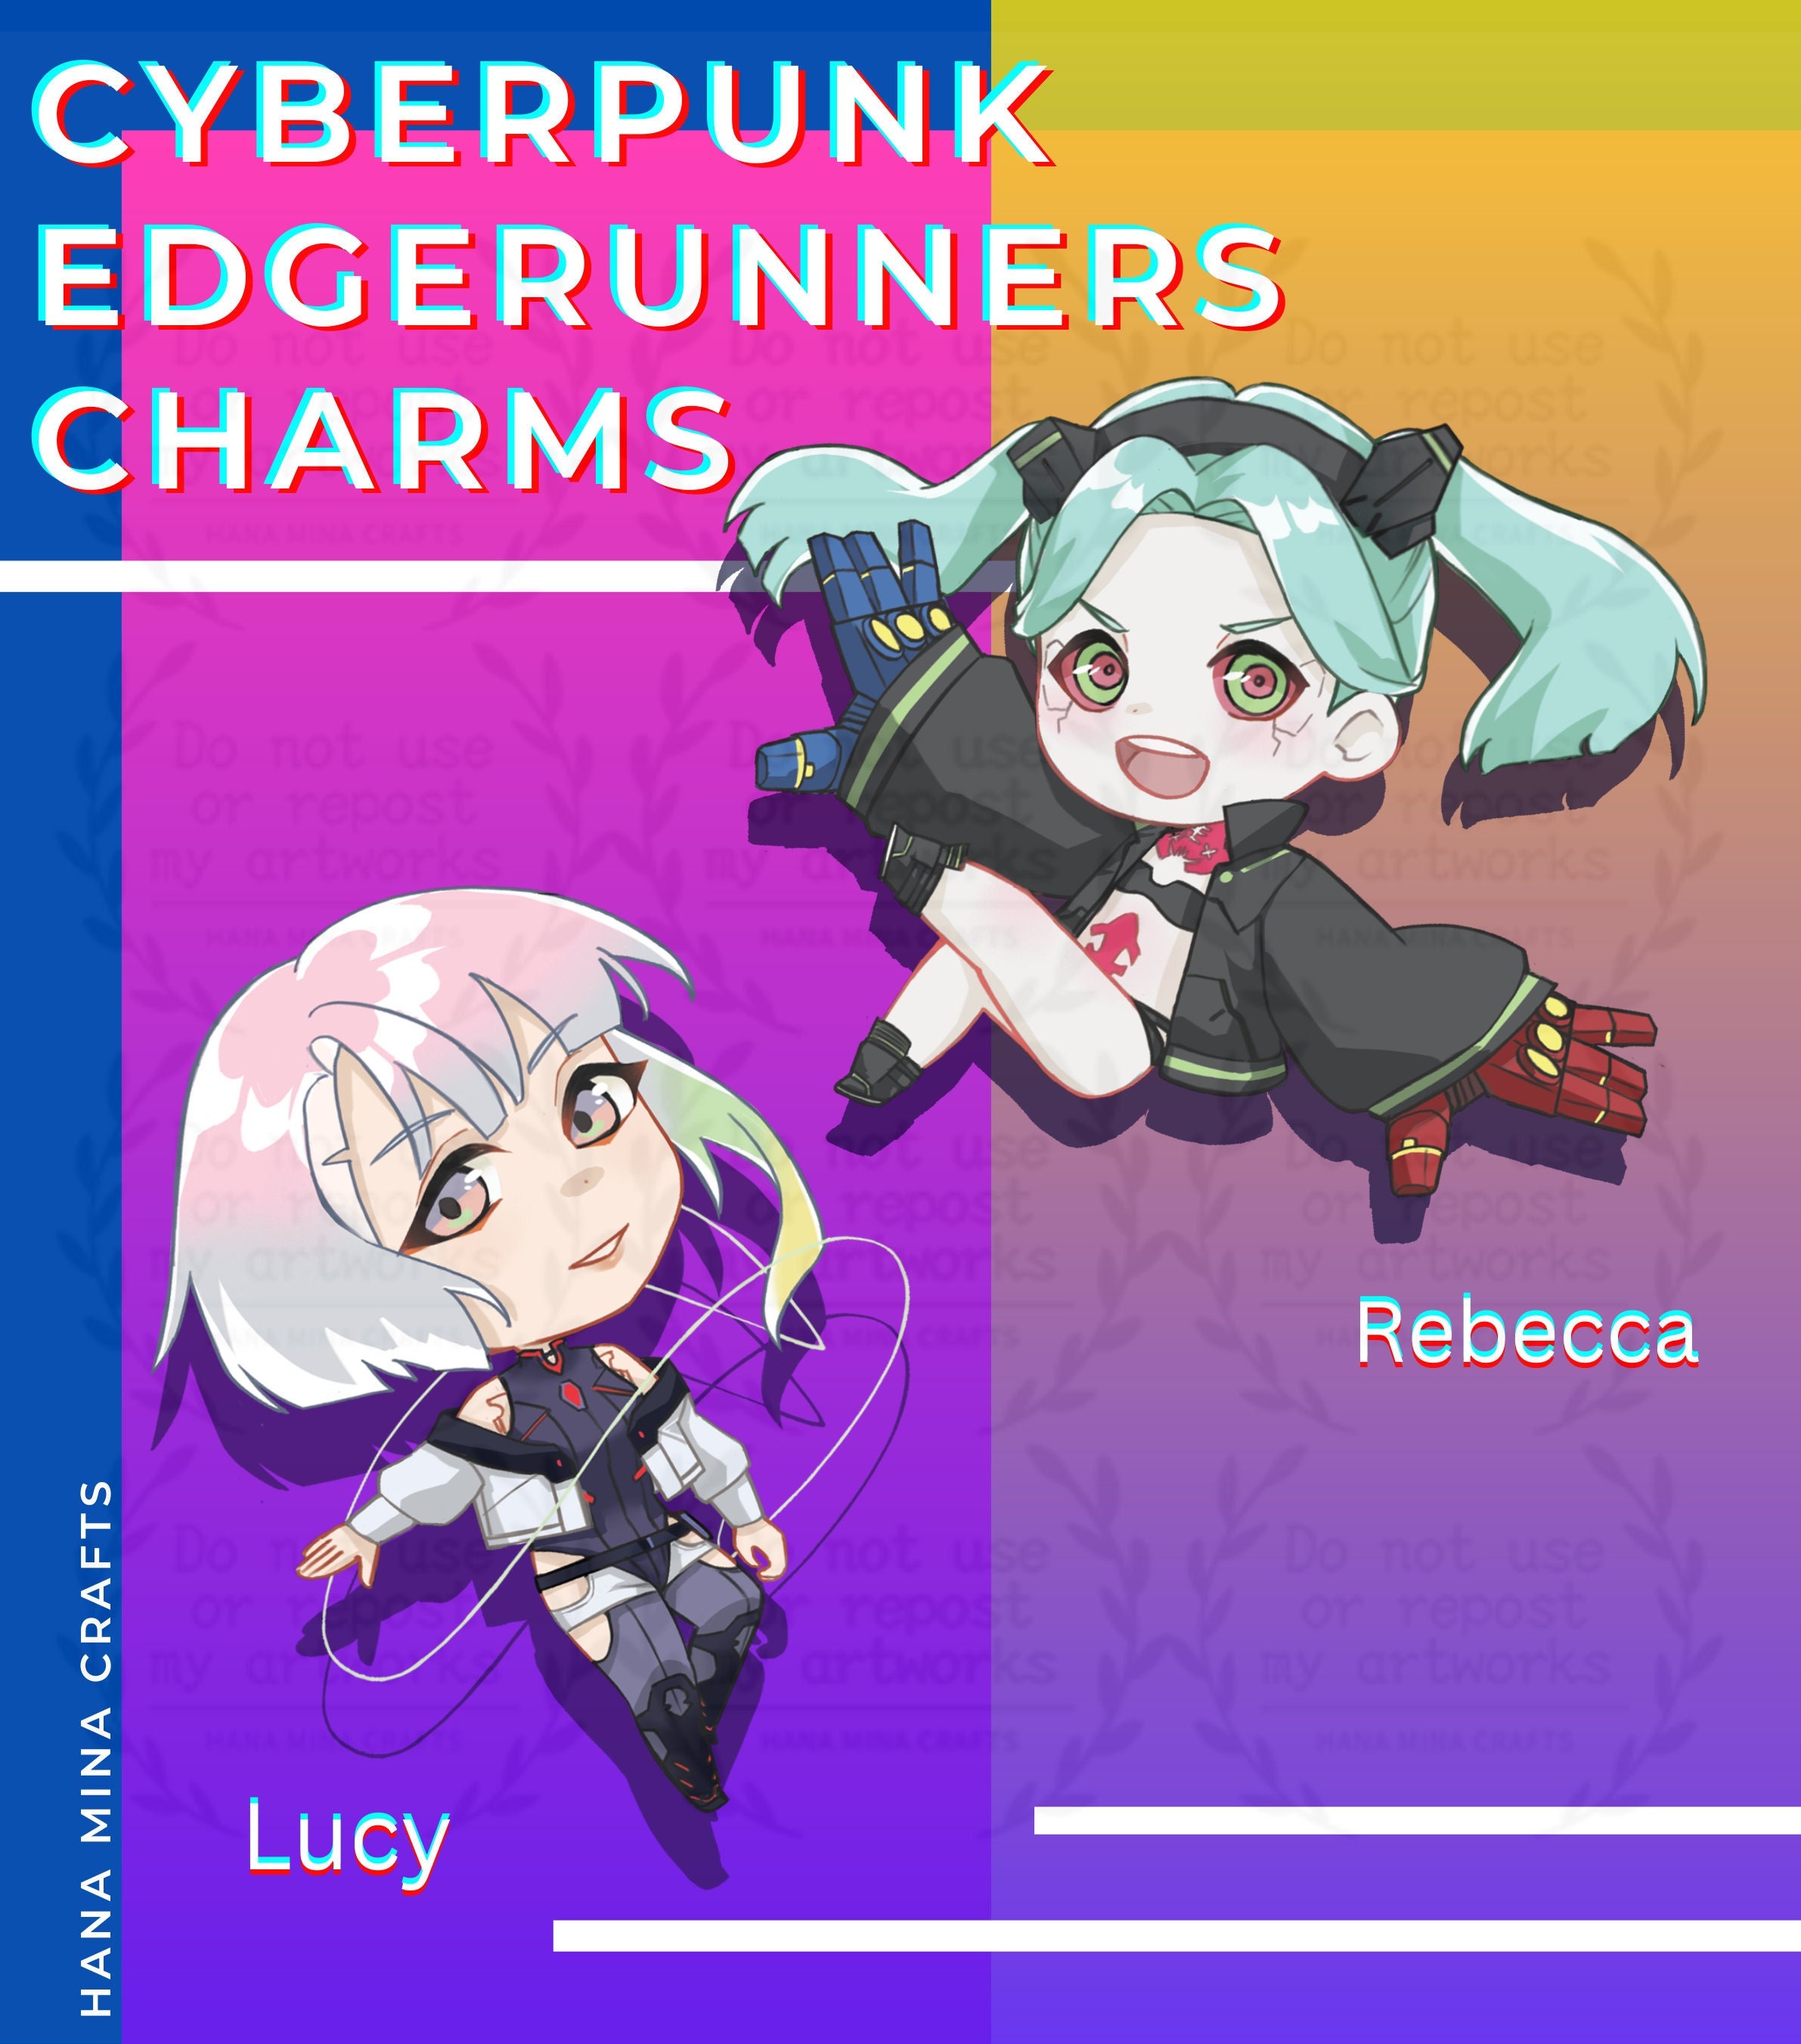 Cyberpunk: Edgerunners Shows Off David, Rebecca and Lucy Figures